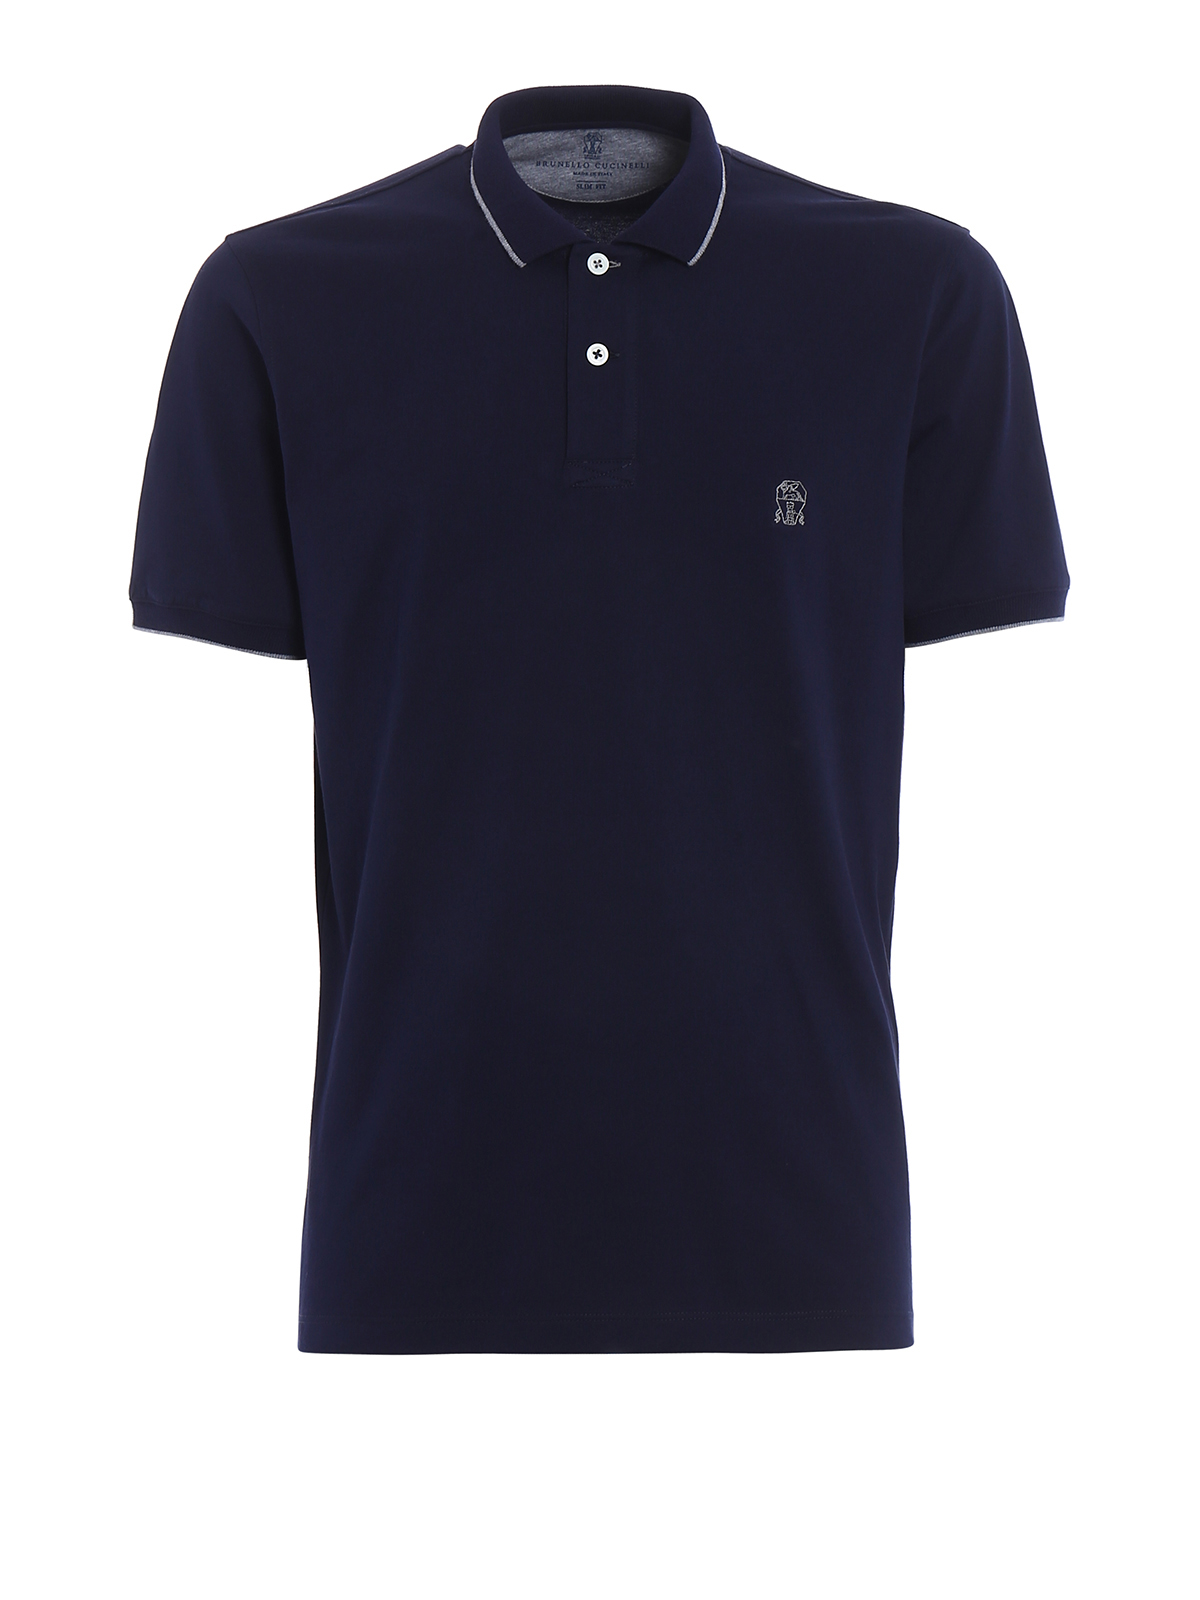 BRUNELLO CUCINELLI EMBROIDERED LOGO JERSEY POLO SHIRT